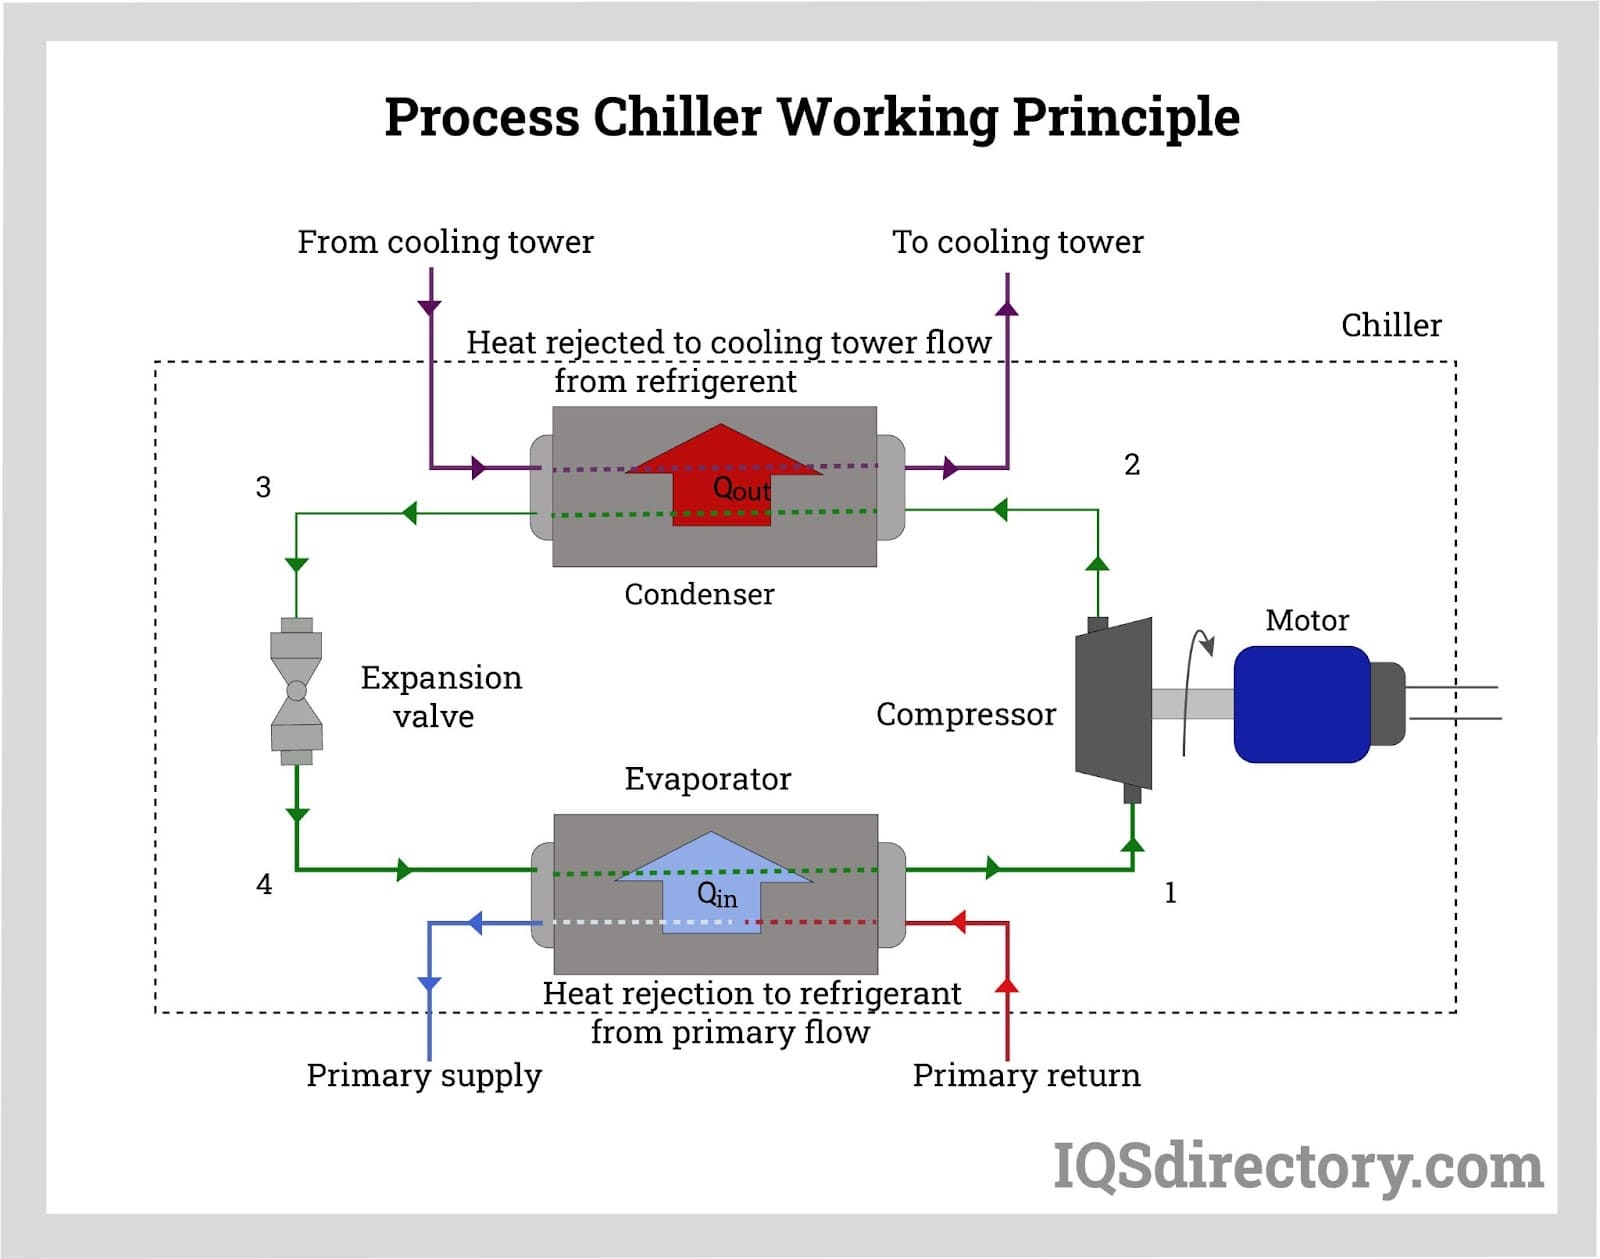 Process Chiller Working Principle